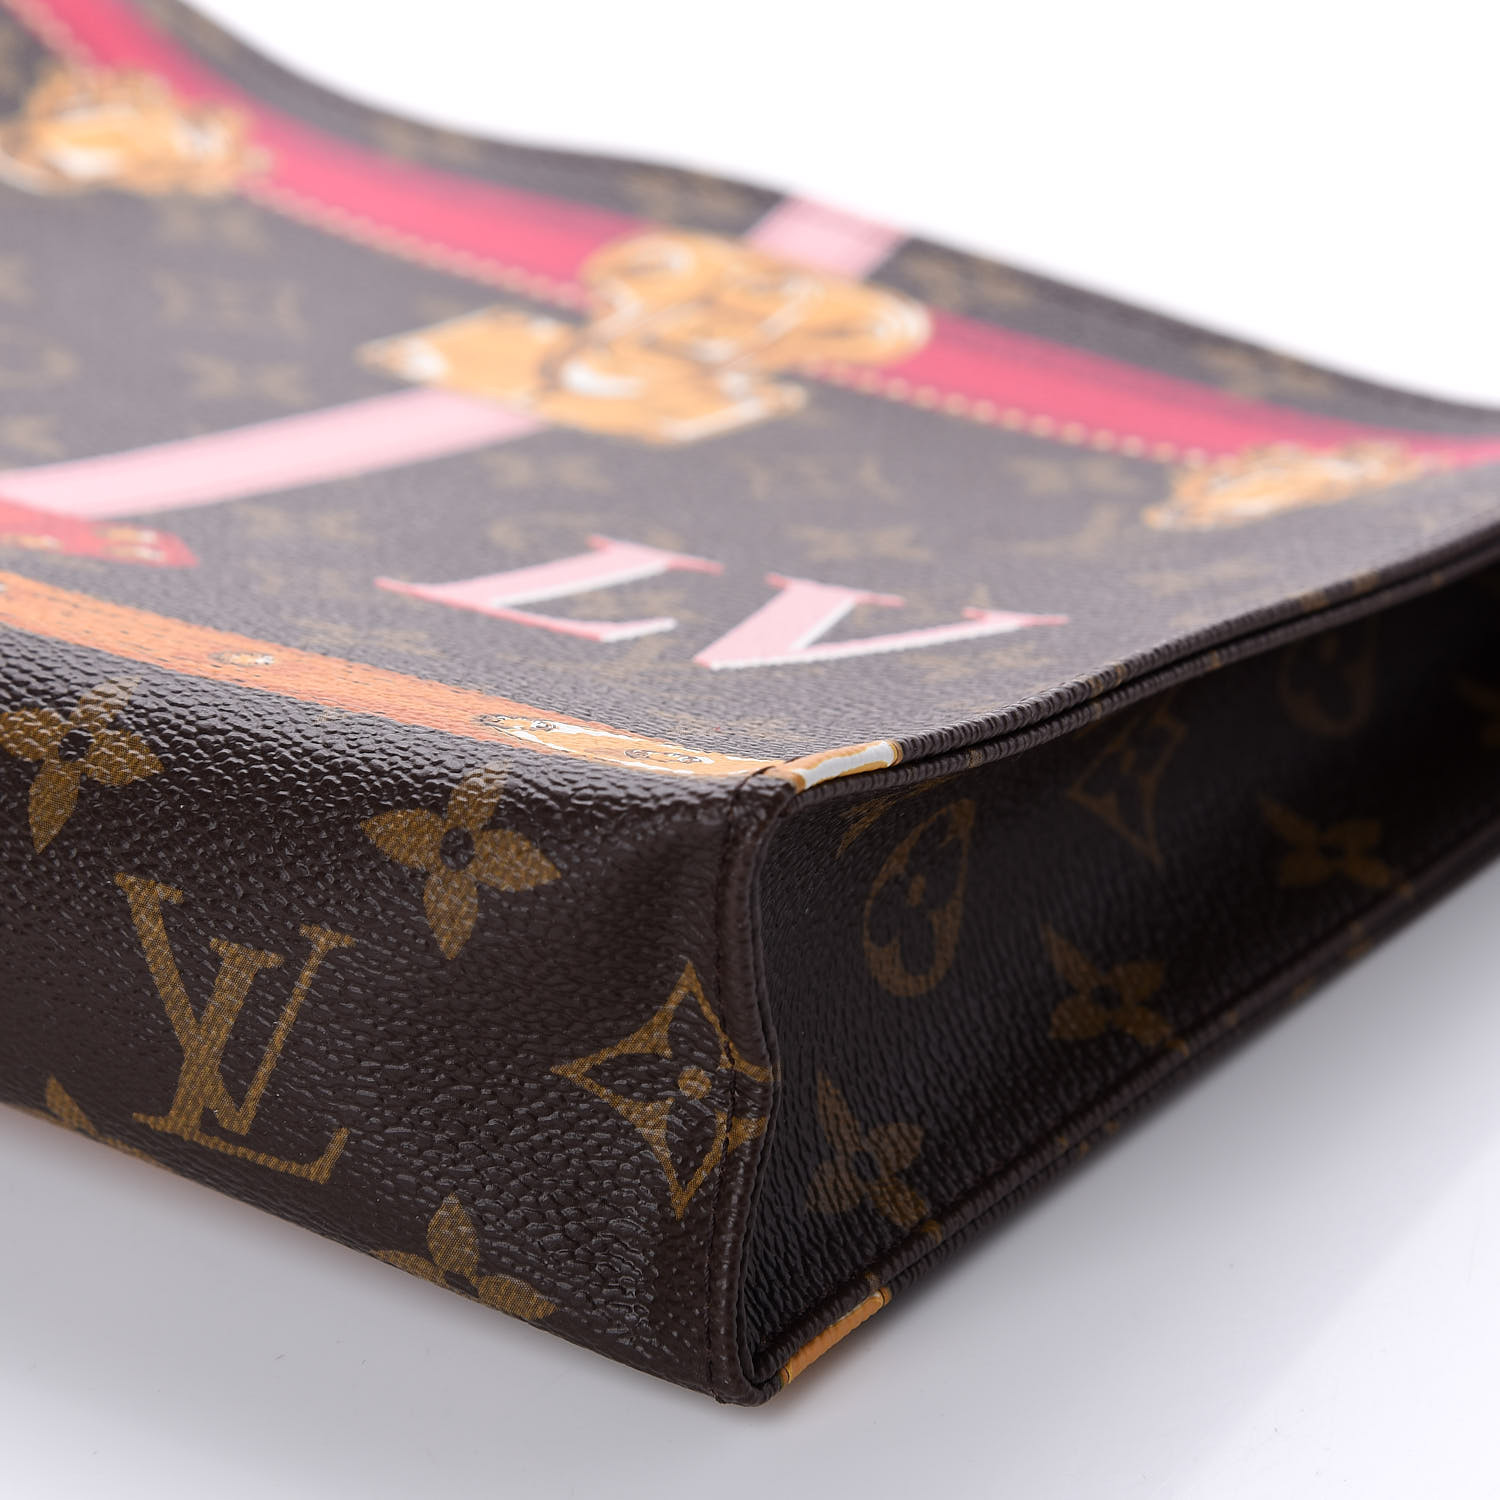 Louis Vuitton Toiletry Pouch Limited Edition Summer Trunks Monogram Canvas  26